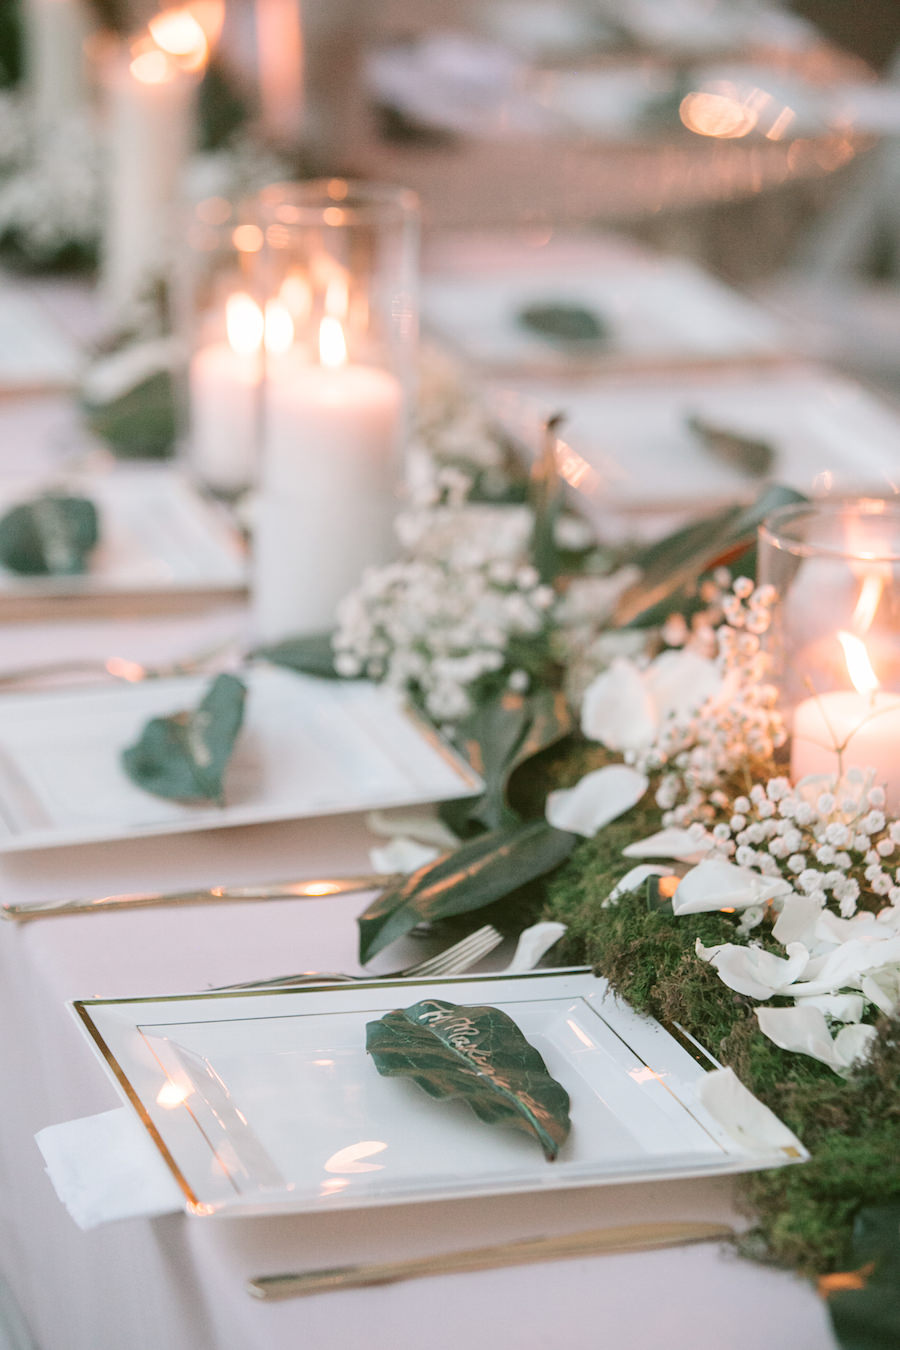 Rustic Wedding Table Setting with White Candles, Ivory Rose Petals, Baby’s Breath and Greenery | Tampa Bay Wedding Floral Designer Northside Florist